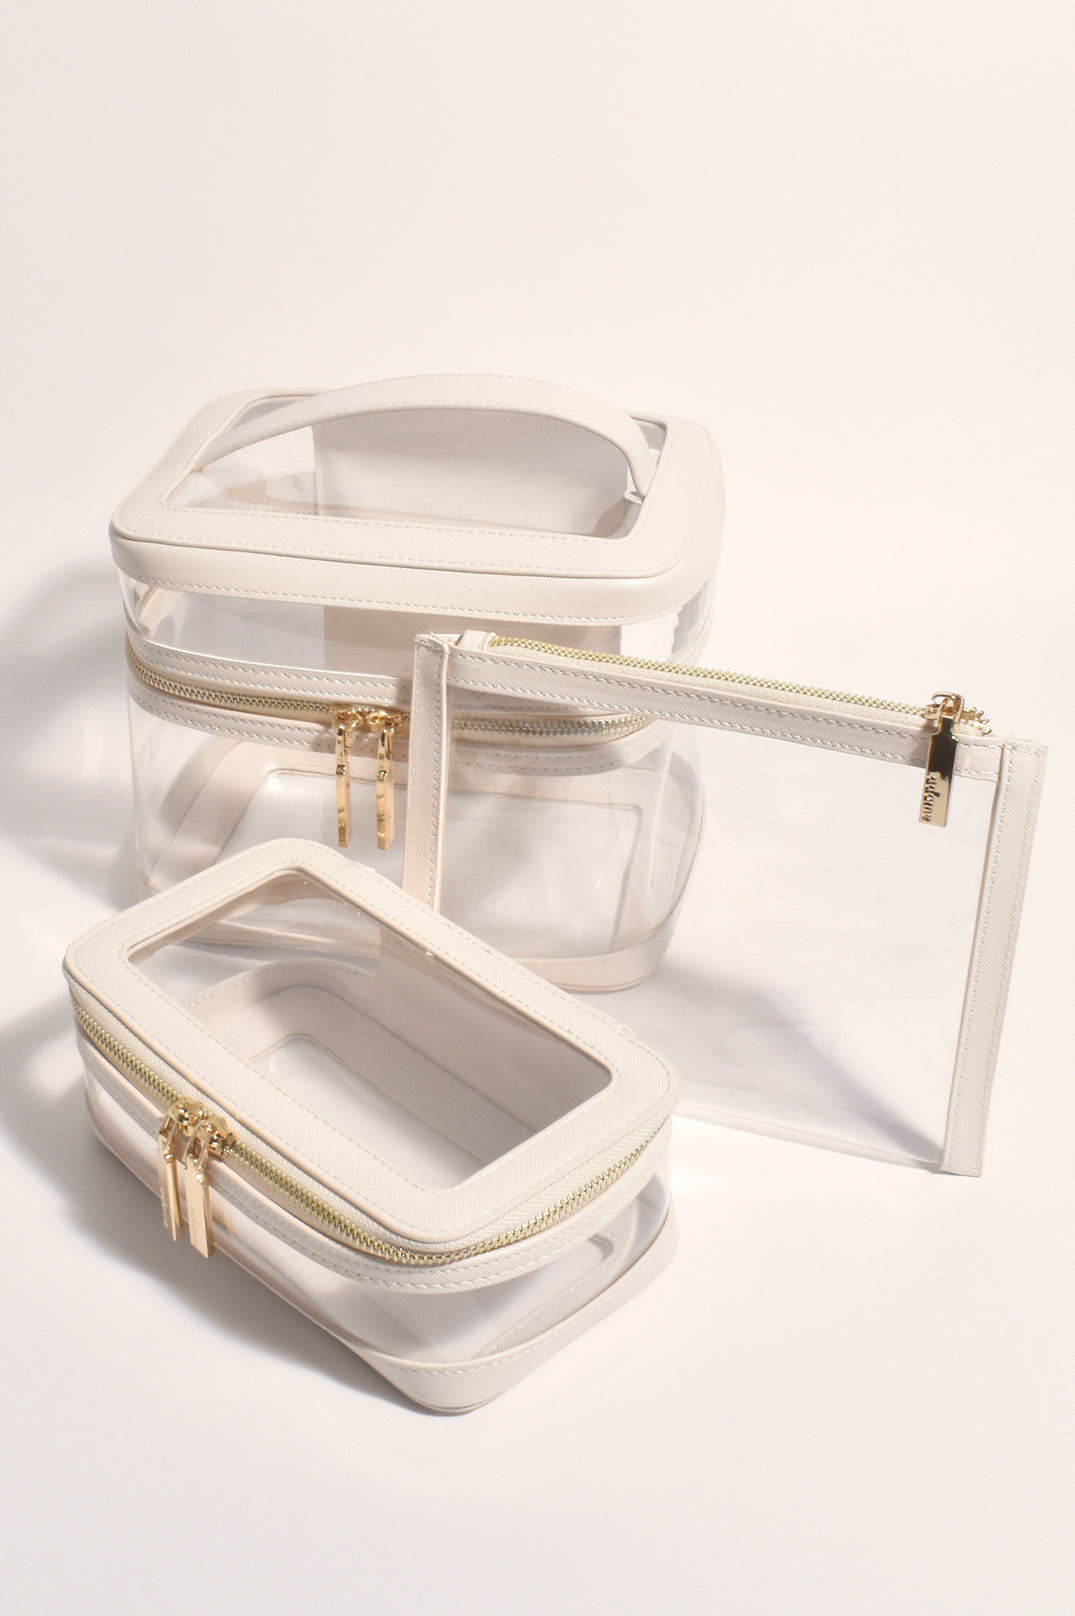 Adorne Seeing Clearly Toiletries Case